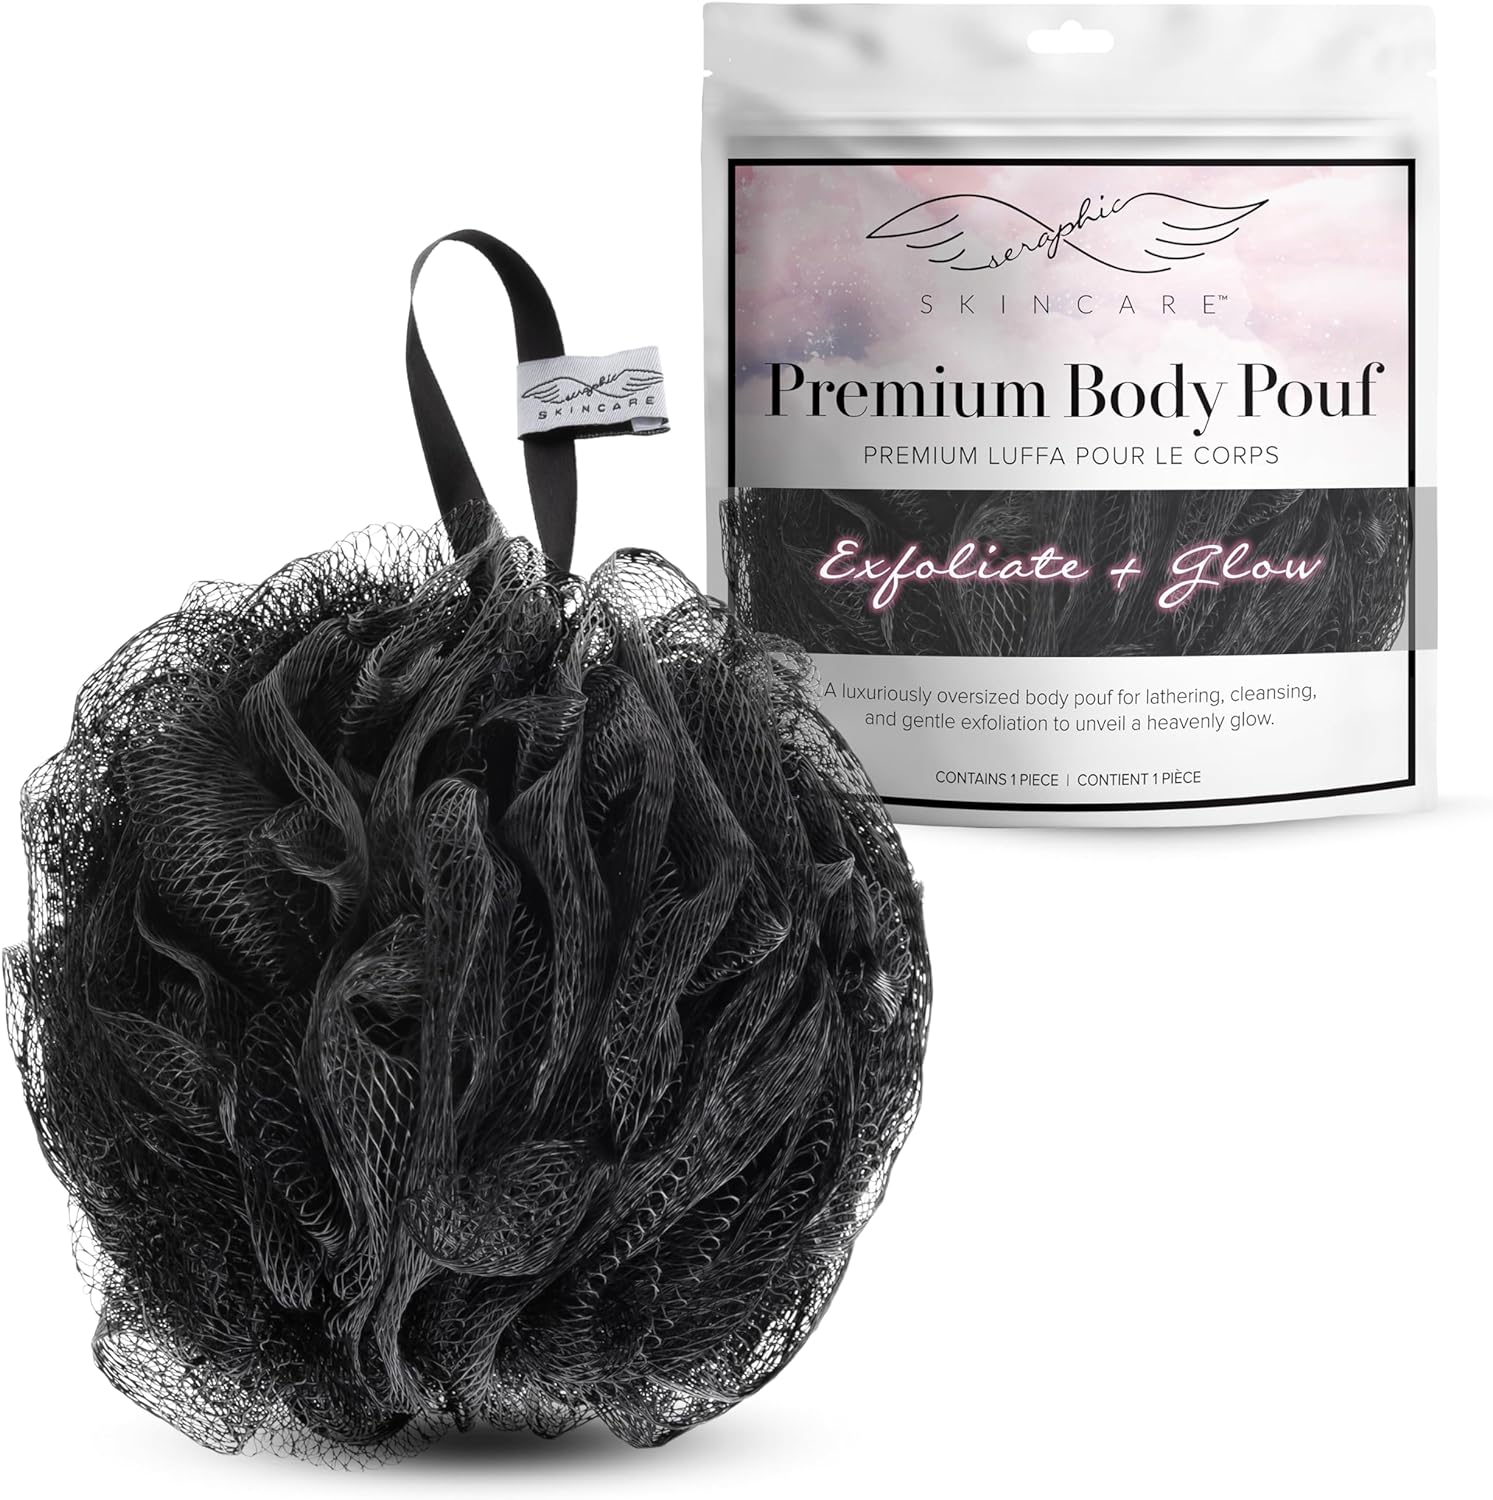 Seraphic Skincare Premium Body Pouf Loofah – 100g Shower Pouf Body Exfoliator for Gentle Exfoliation and Cleansing – Premium Exfoliating Body Scrubber to Reveal Silky Smooth, Glowing Skin (Black)